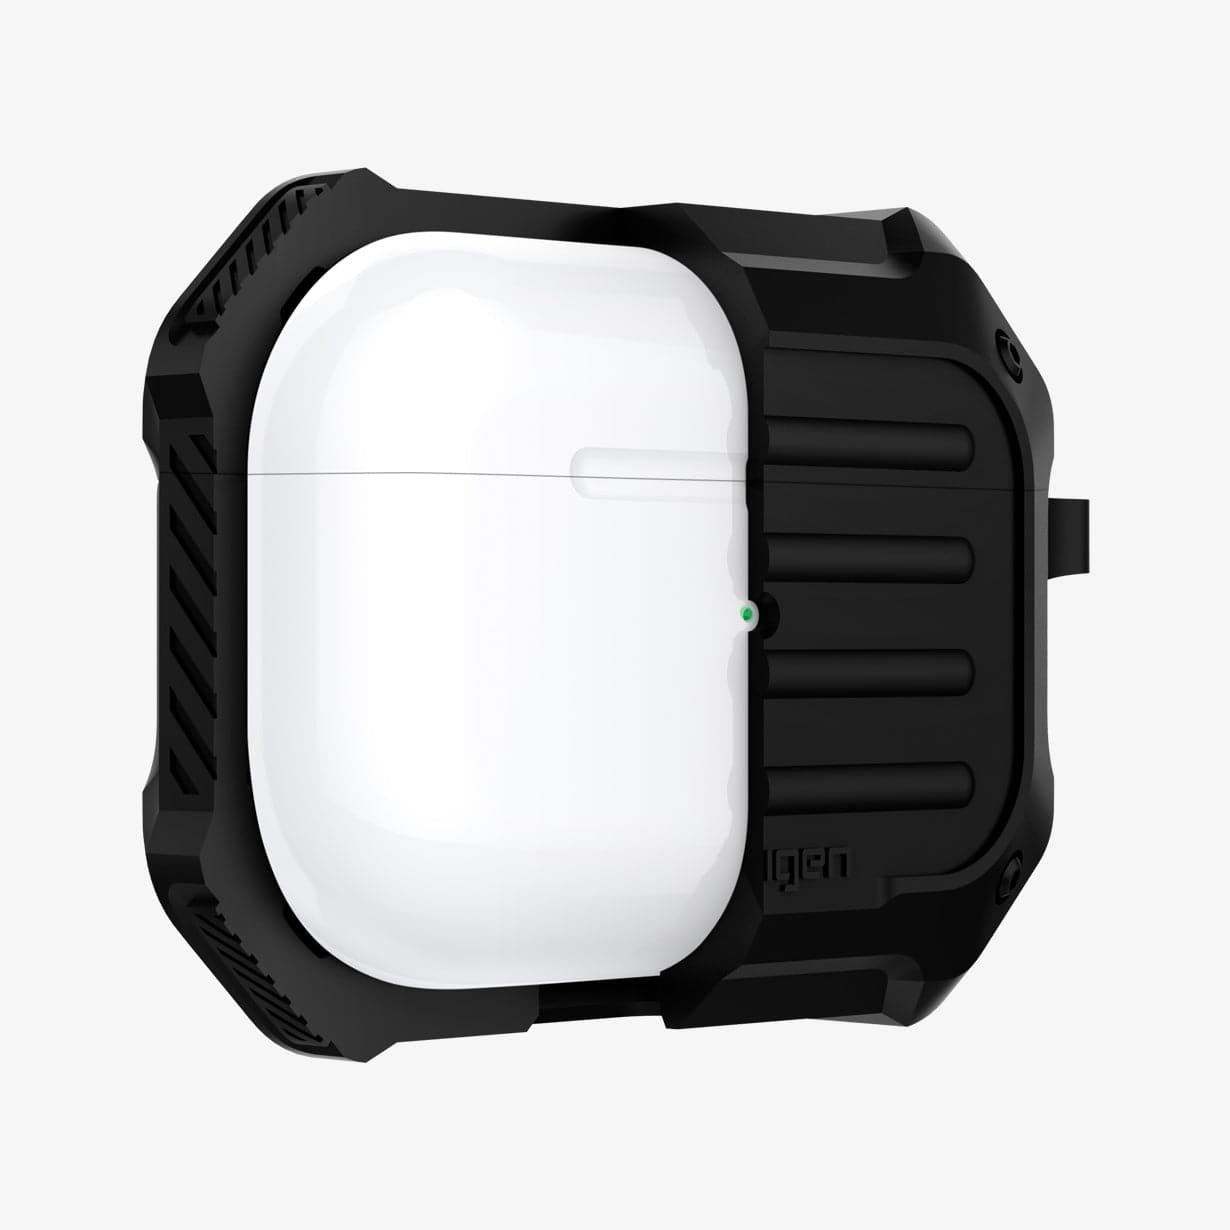 ASD00537 - Apple AirPods Pro Case Tough Armor in black showing the front with case cut half open